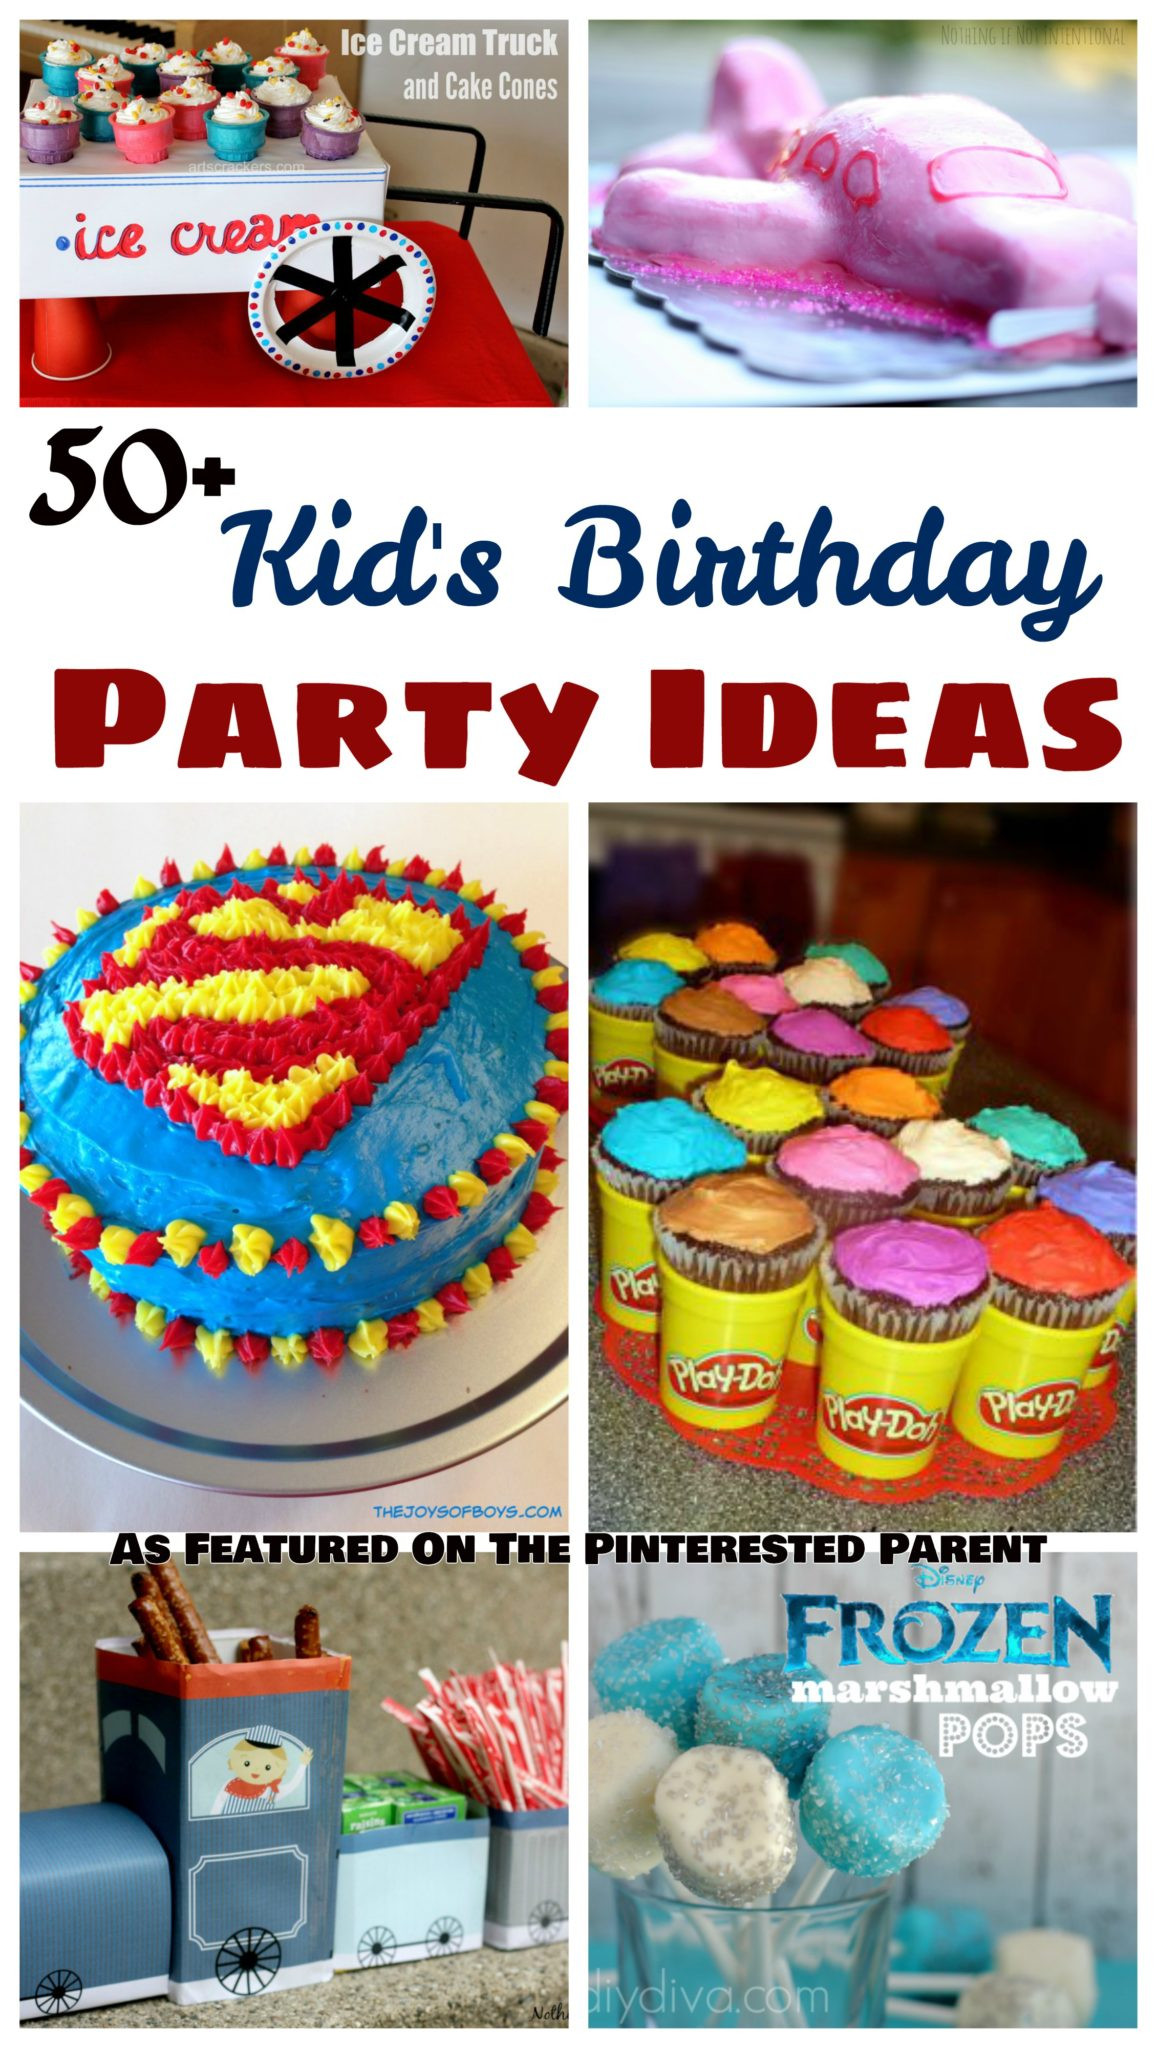 Family Birthday Party Ideas
 50 Kid s Birthday Party Ideas – The Pinterested Parent